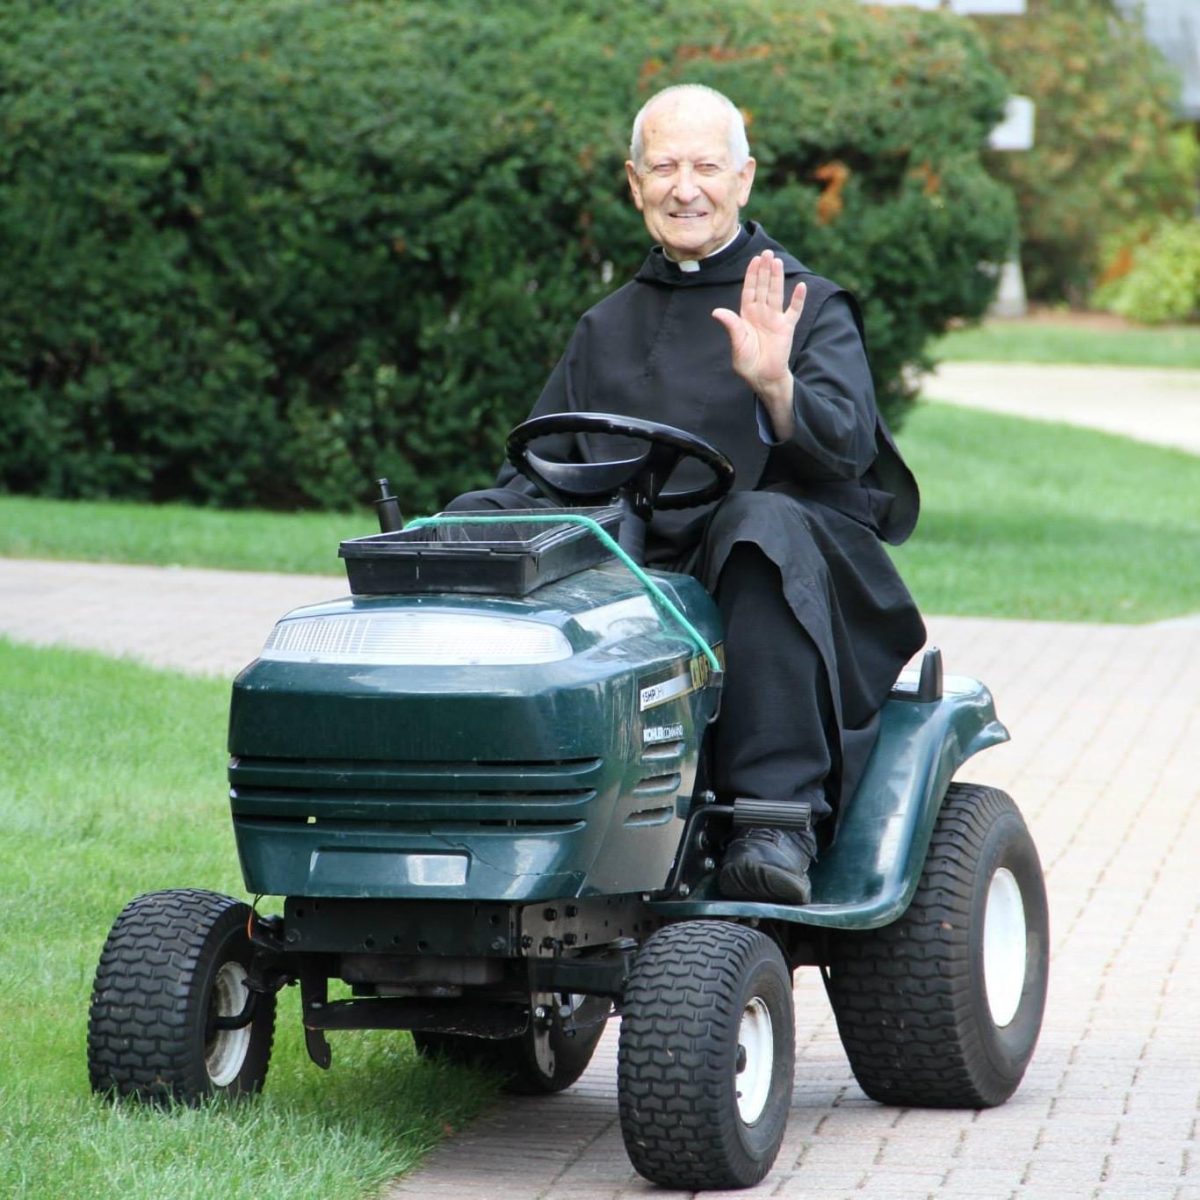 Father Cecil Donahue, O.S.B. A beloved member of the Saint Anselm community